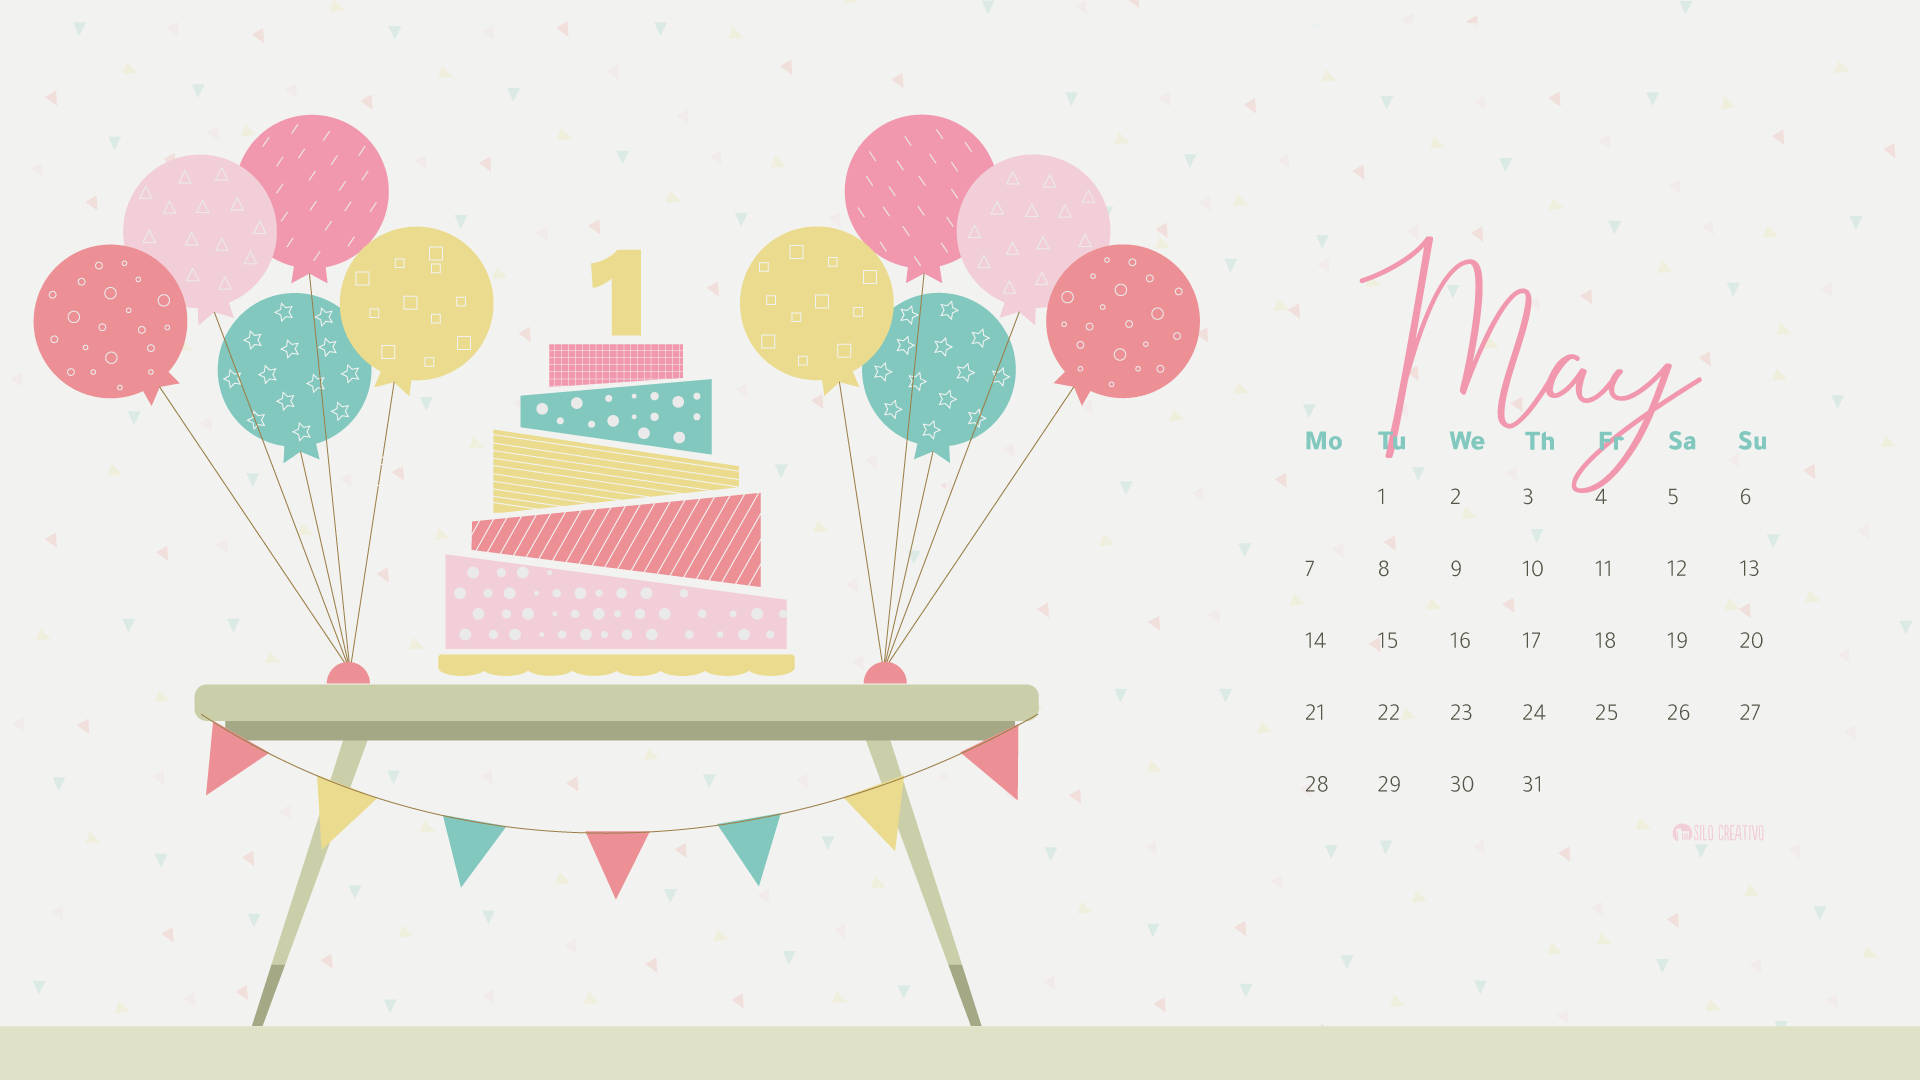 A Calendar With A Cake And Balloons Wallpaper